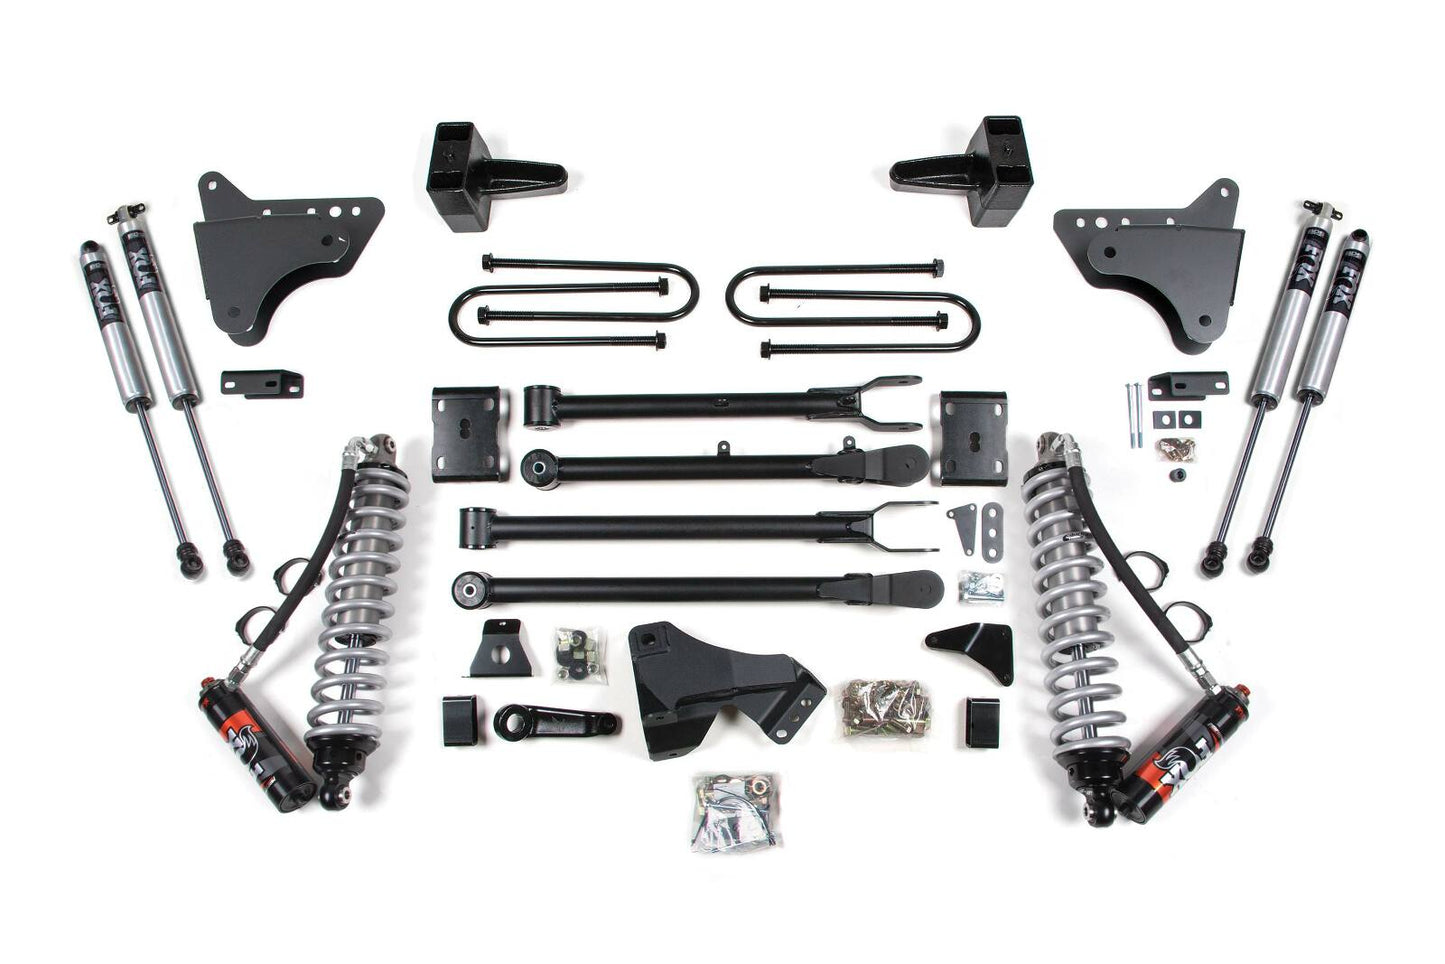 2011-2016 Ford F250/F350 4wd 4" 4-Link Suspension Lift Kit, 4" Rear, Spring, Diesel - Fox 2.5 PES C/O Front, Fox 2.0 IFP PS Aux Front, Fox 2.0 IFP PS Rear